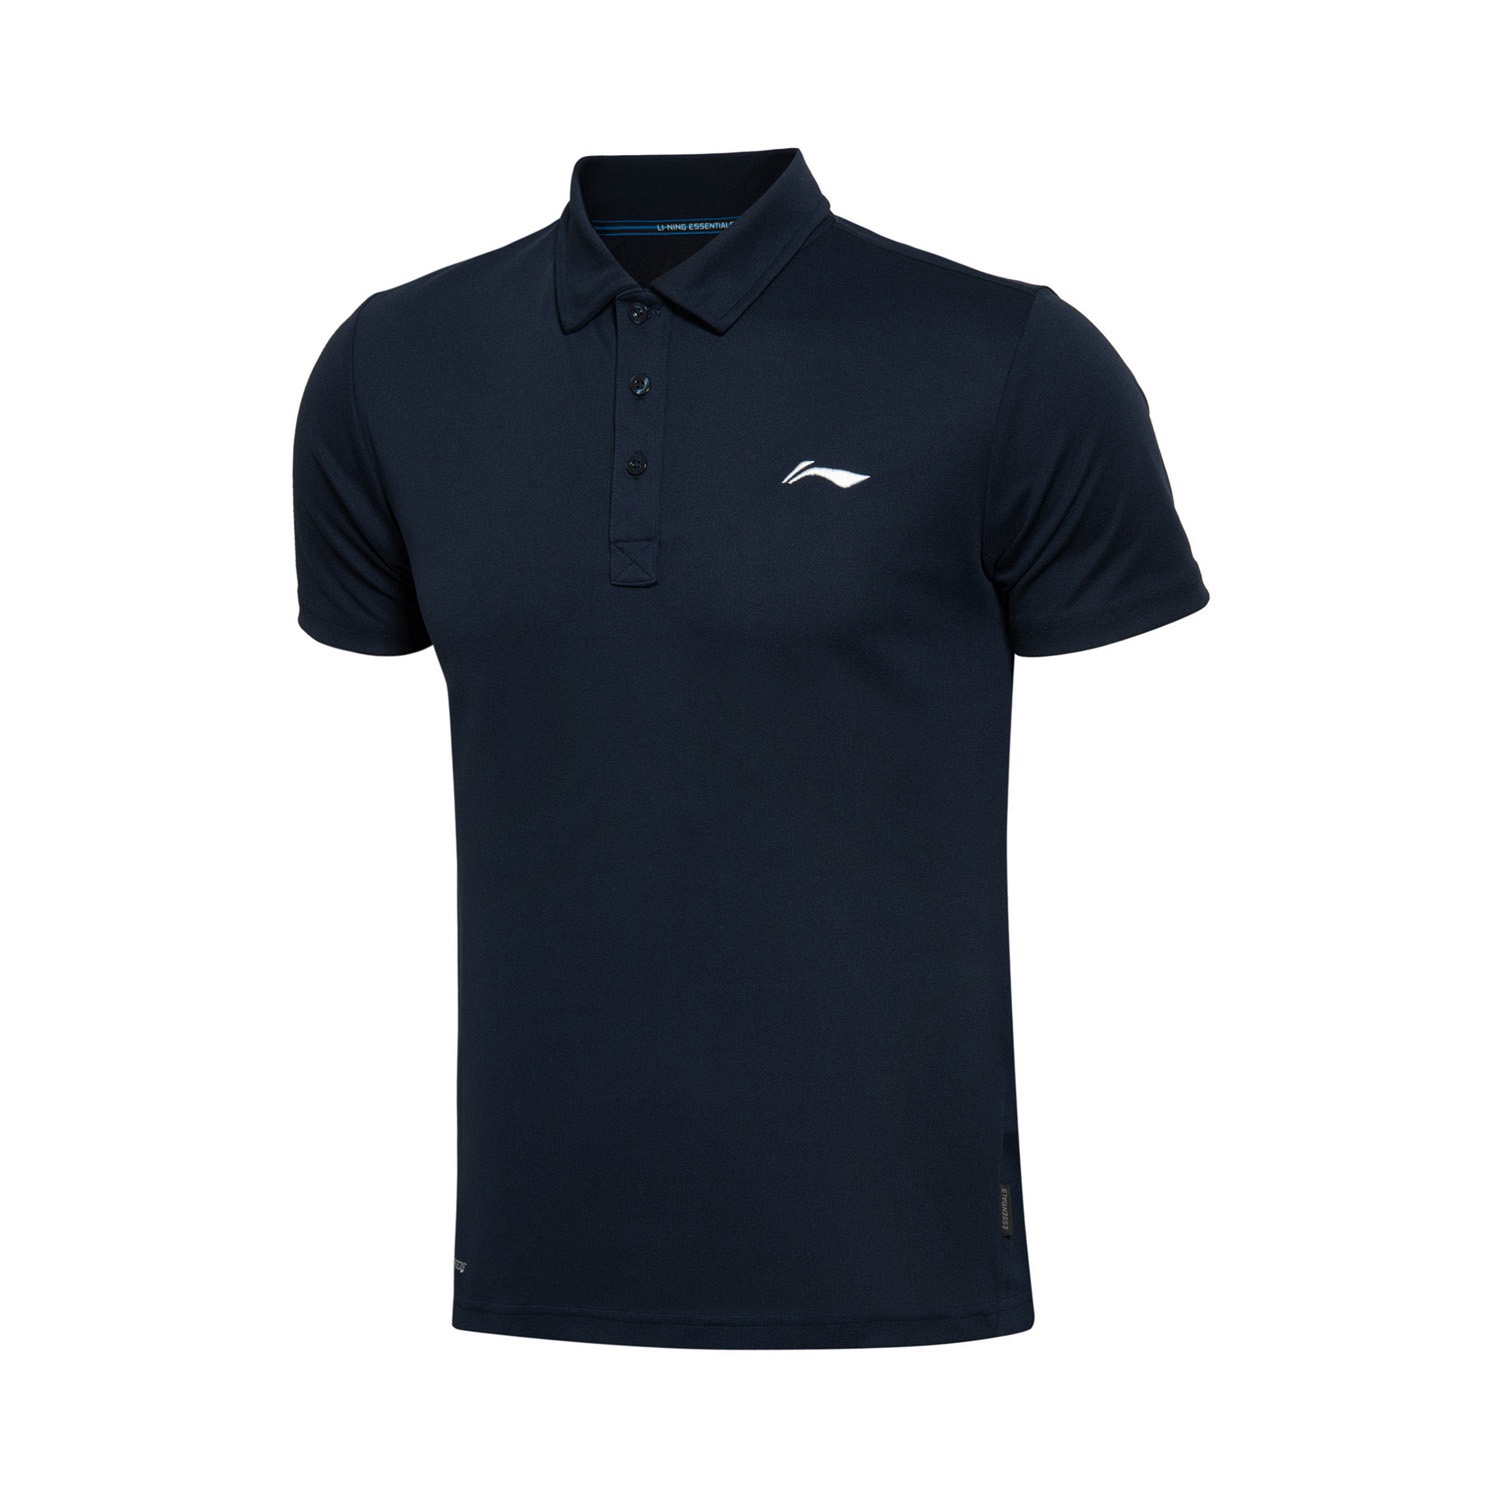 Polo sport homme LINING APLL027 en polyester - Ref 562251 Image 1